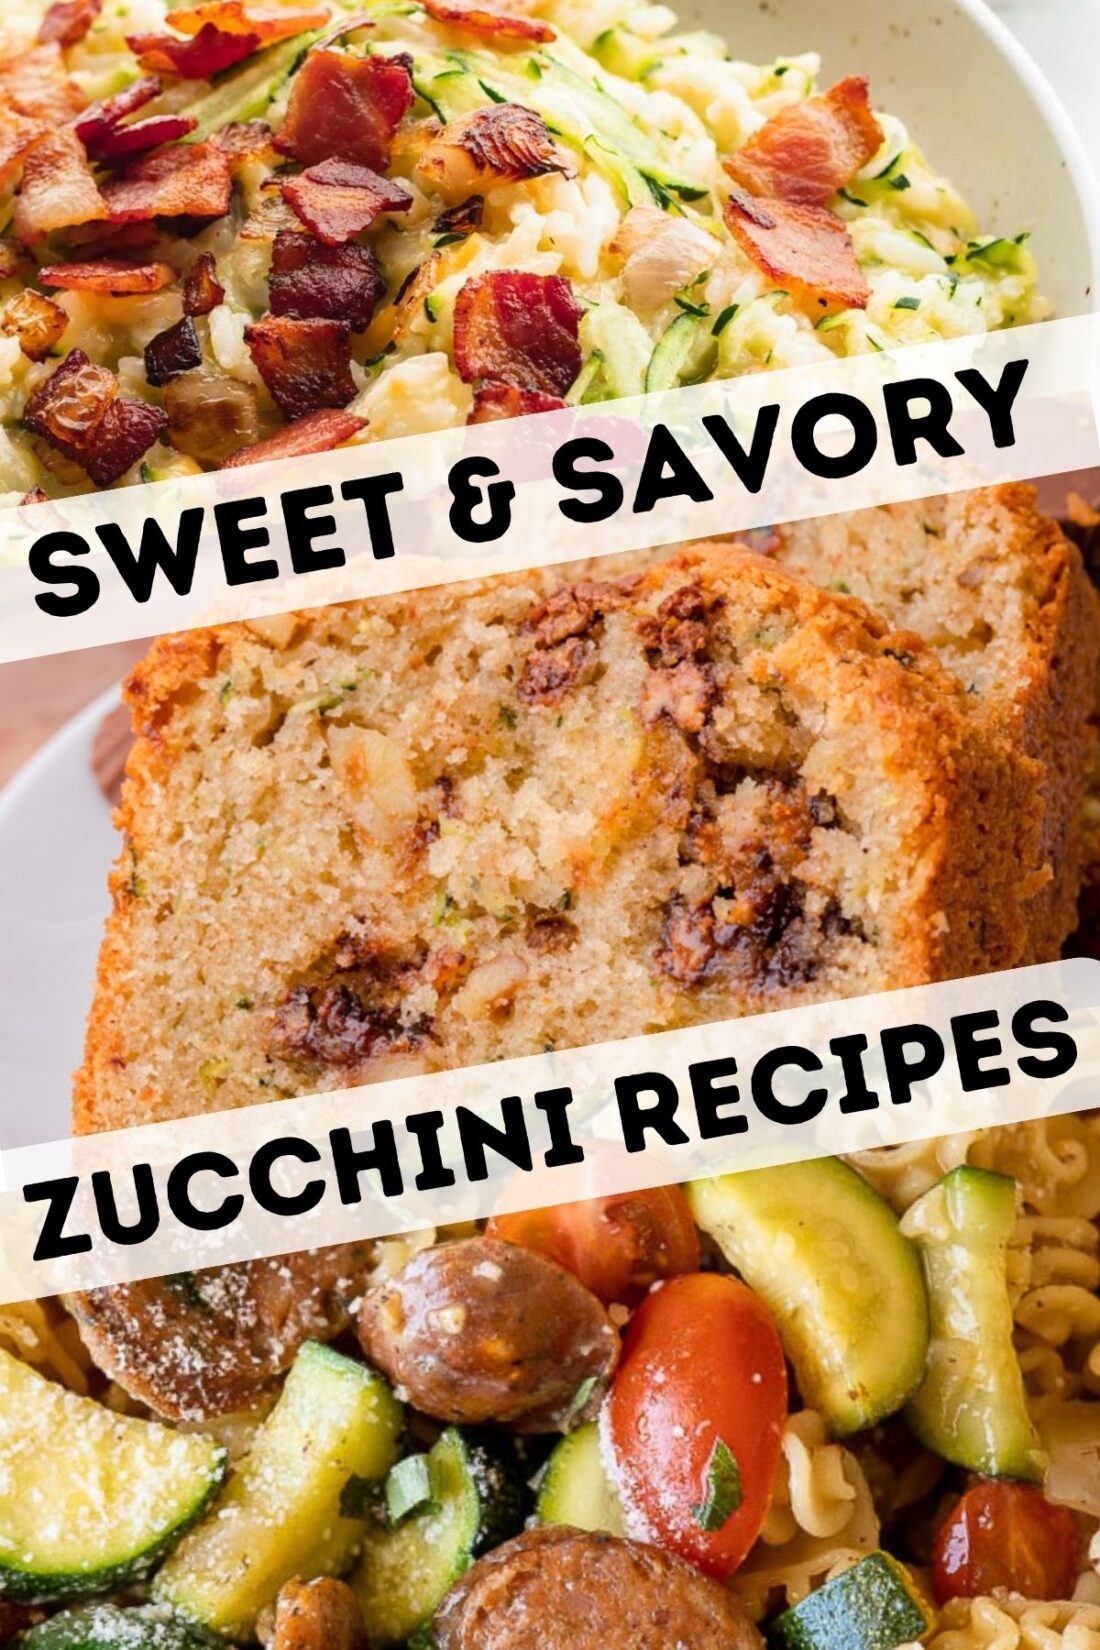 zucchini rice with bacon image over image of zucchini bread with chocolate peanut butter cups. 